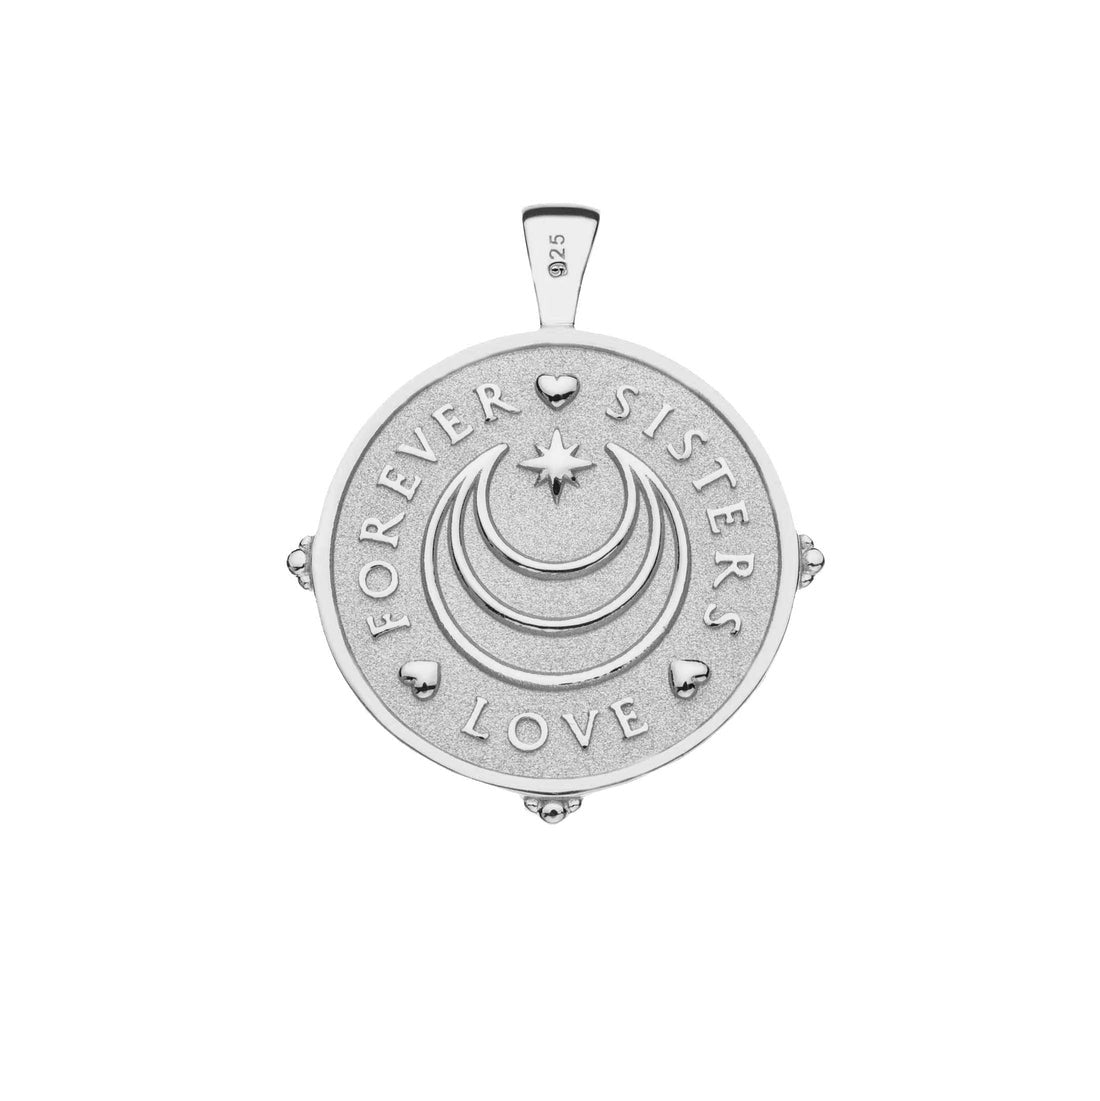 Jane Win SISTERS Forever Original Coin Pendant Necklace